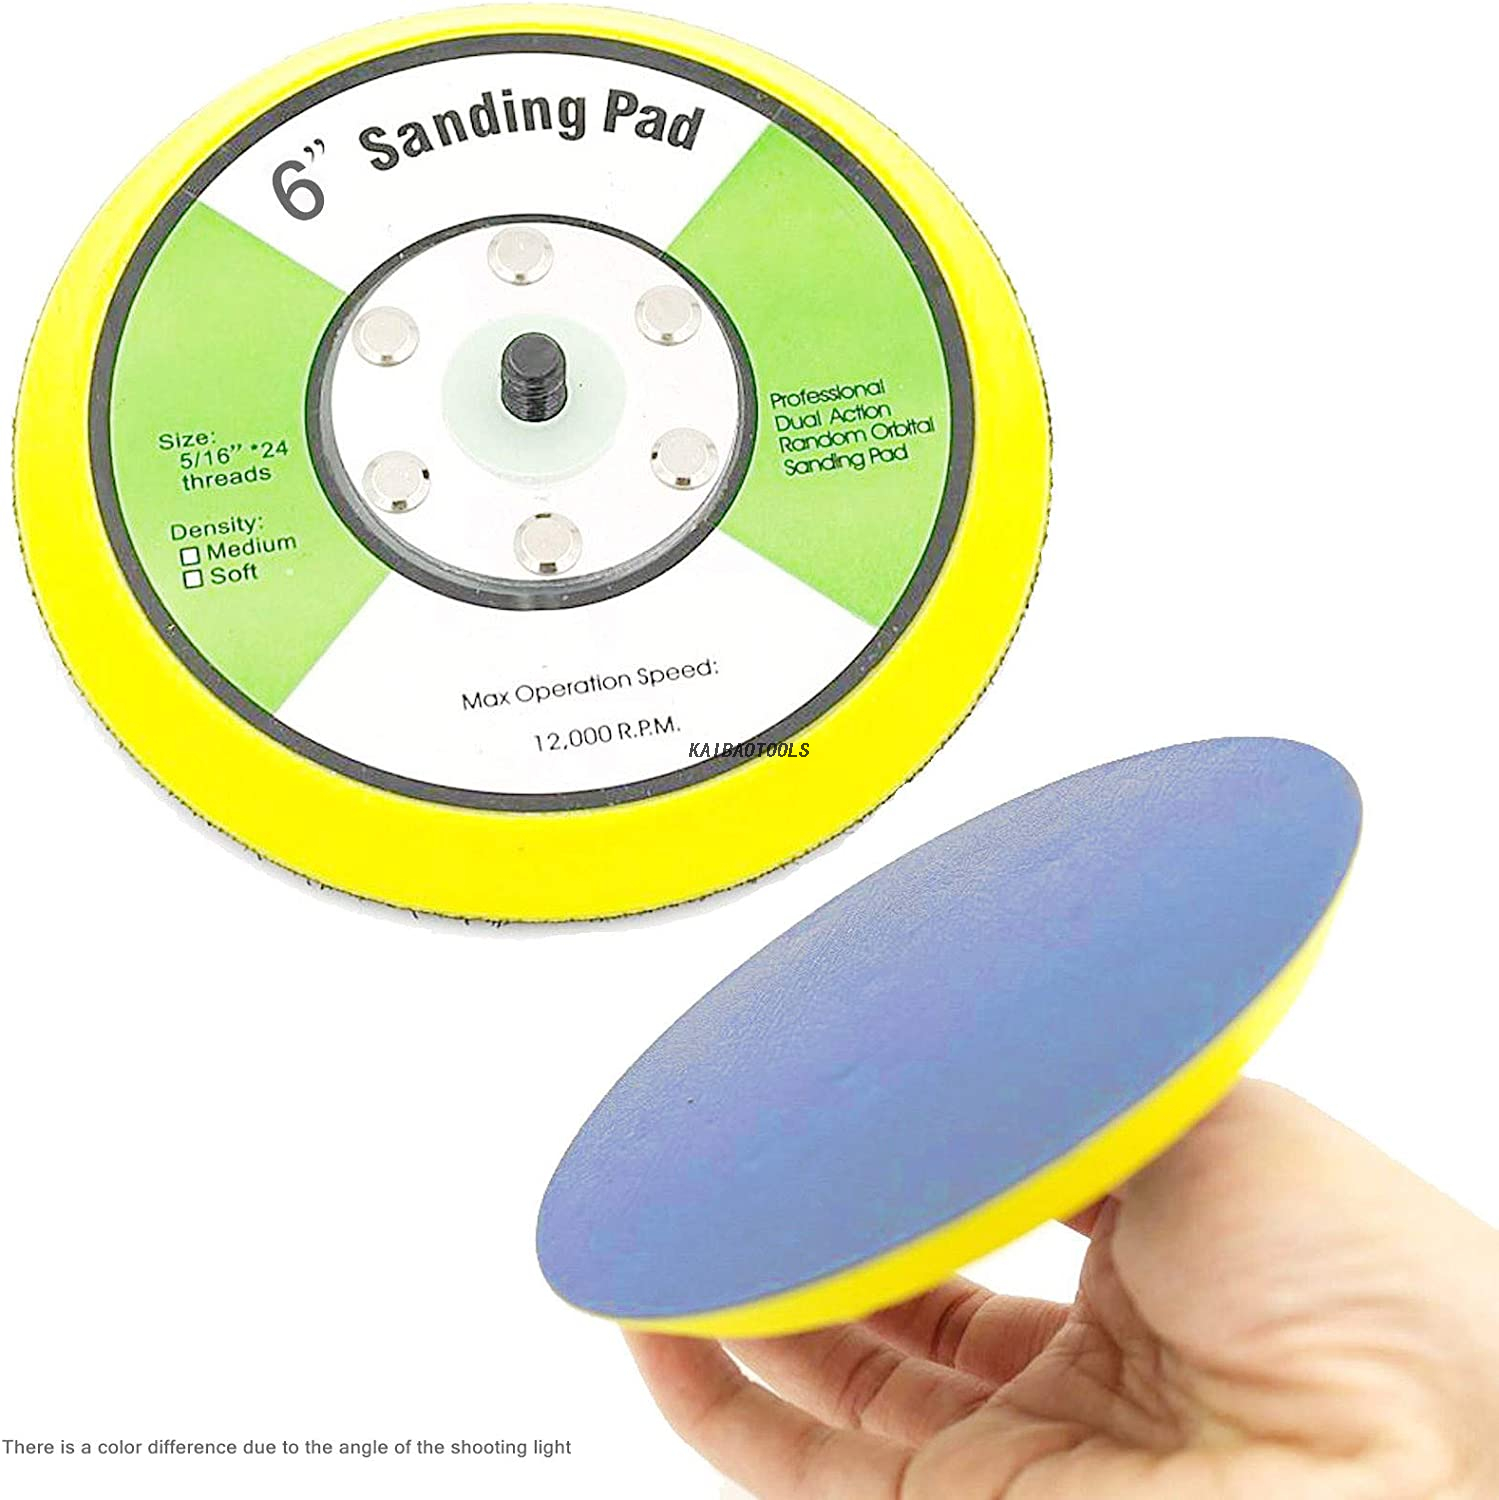  6 inch PSA Sanding Pads and Backing Pad for Dual Action Air Sander 